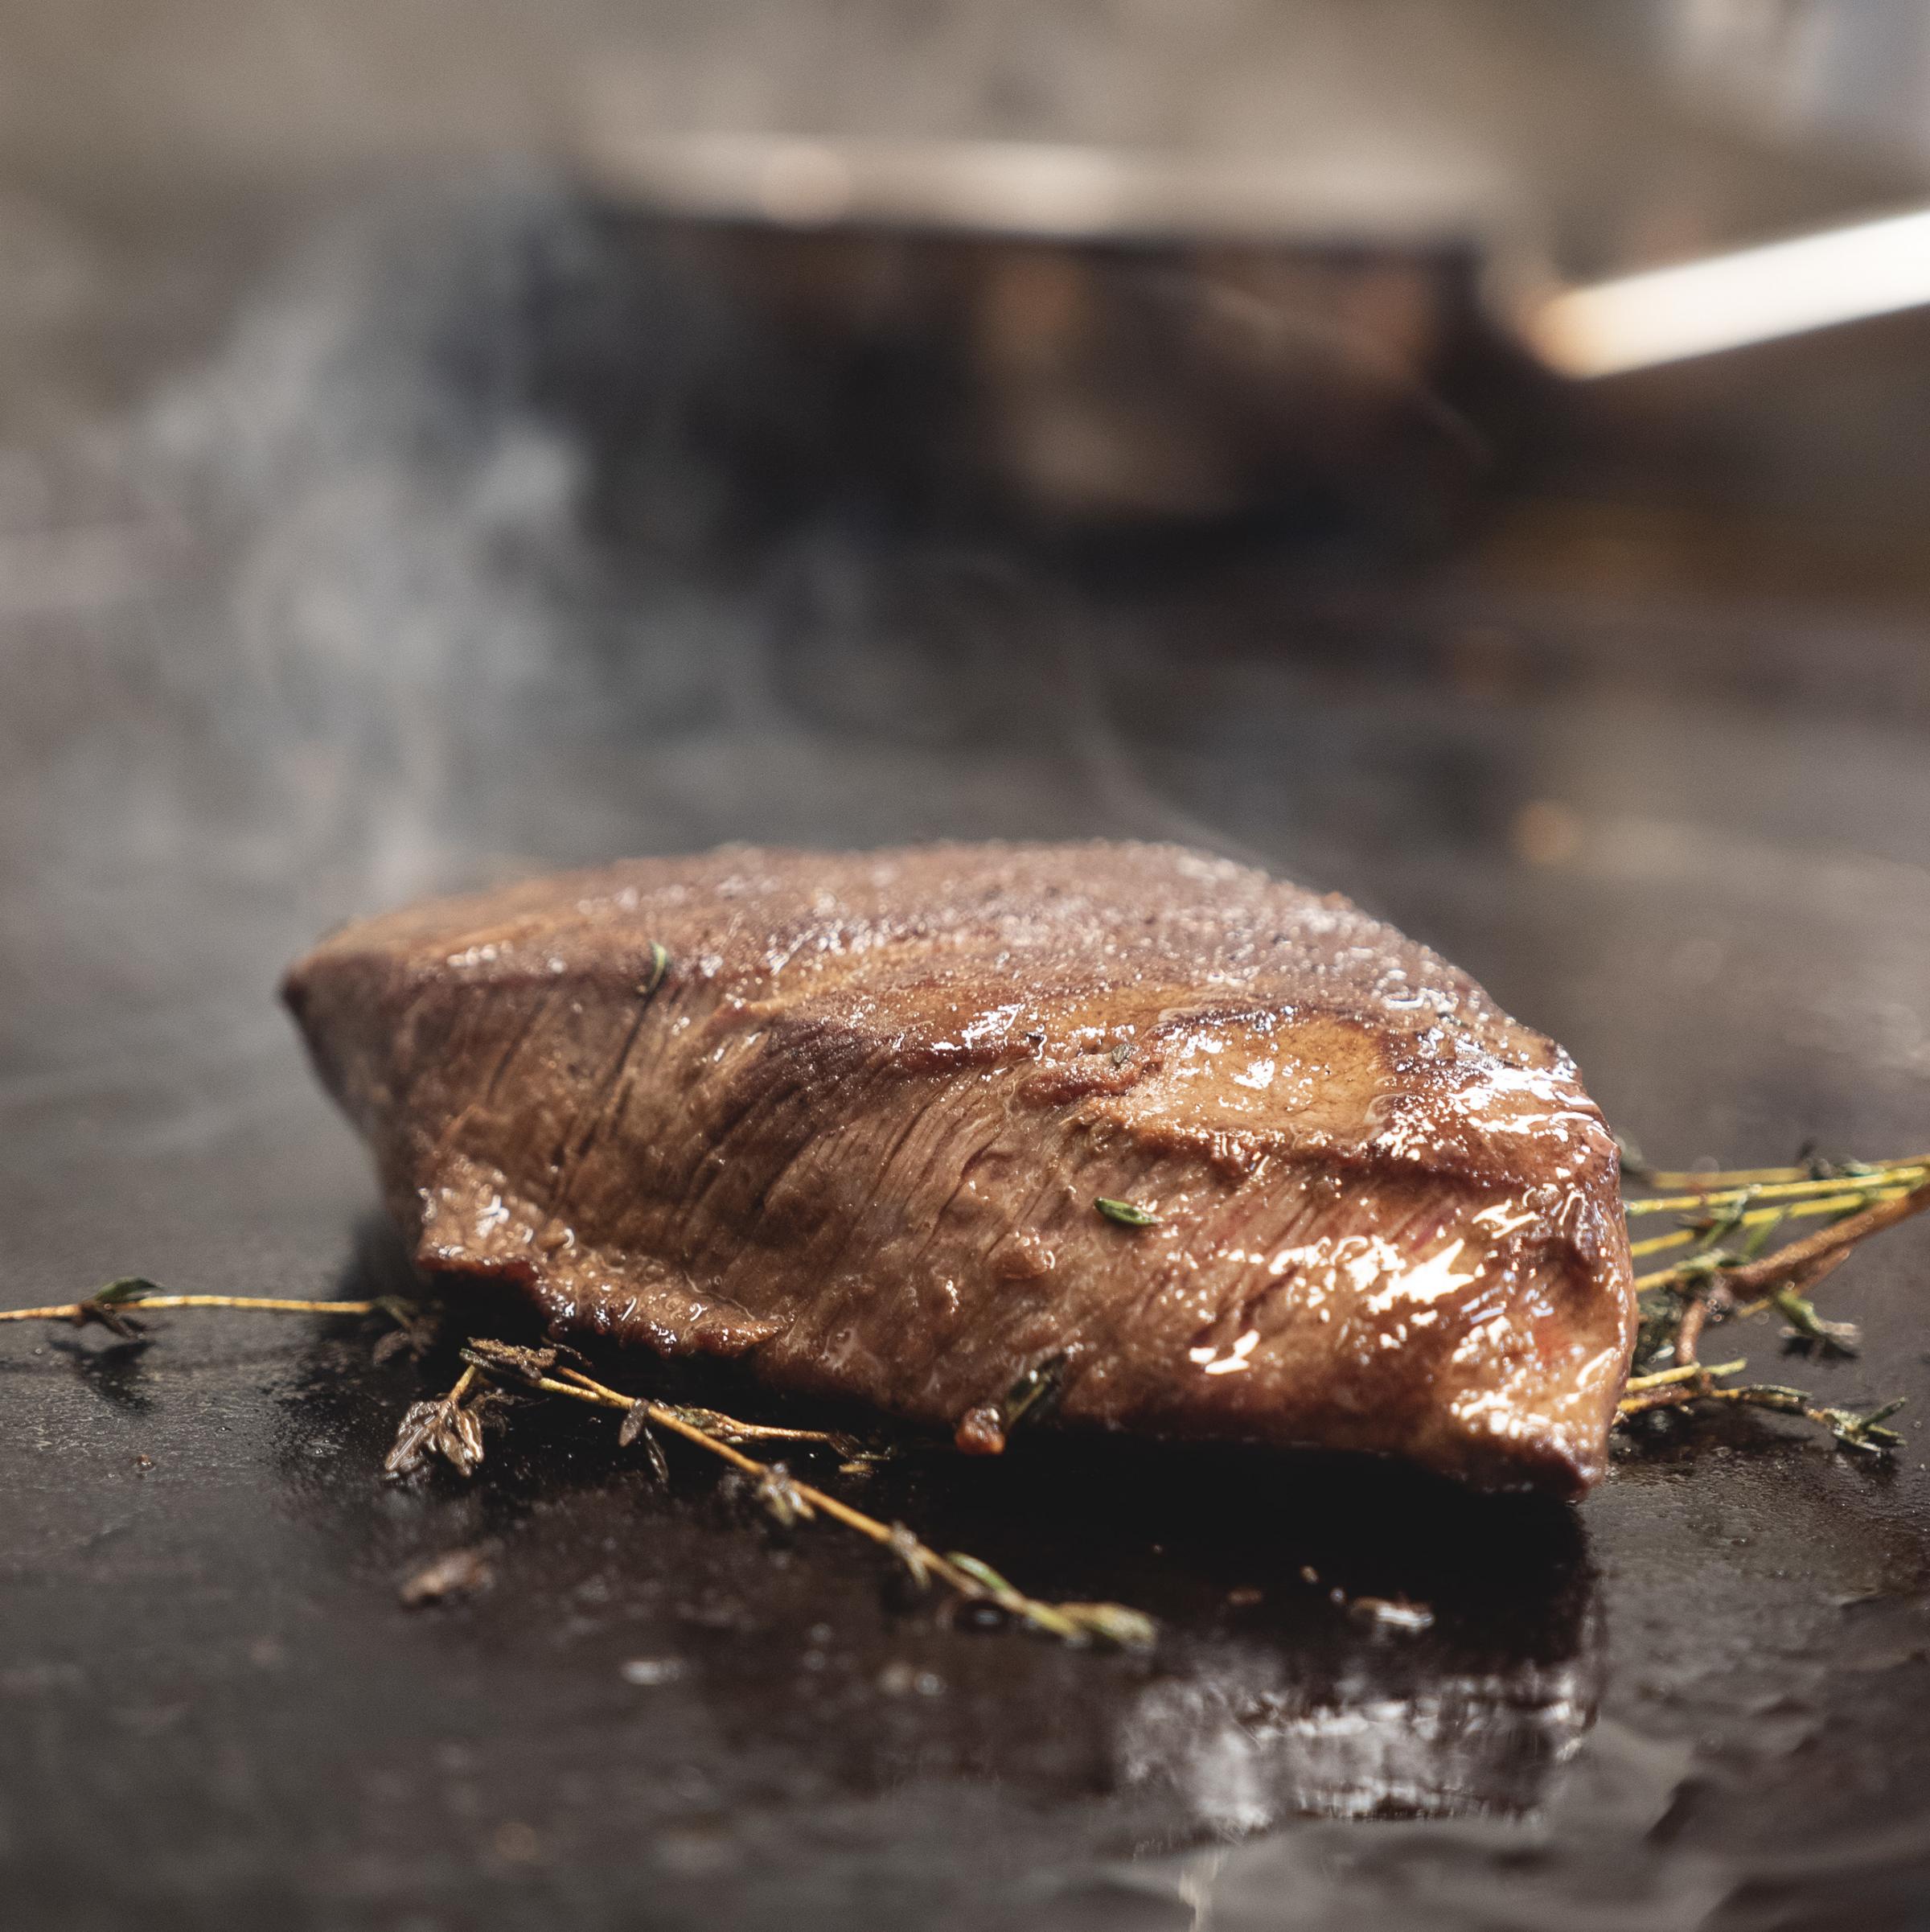 Having selected your steak, the chefs at The Gannet will cook it for you